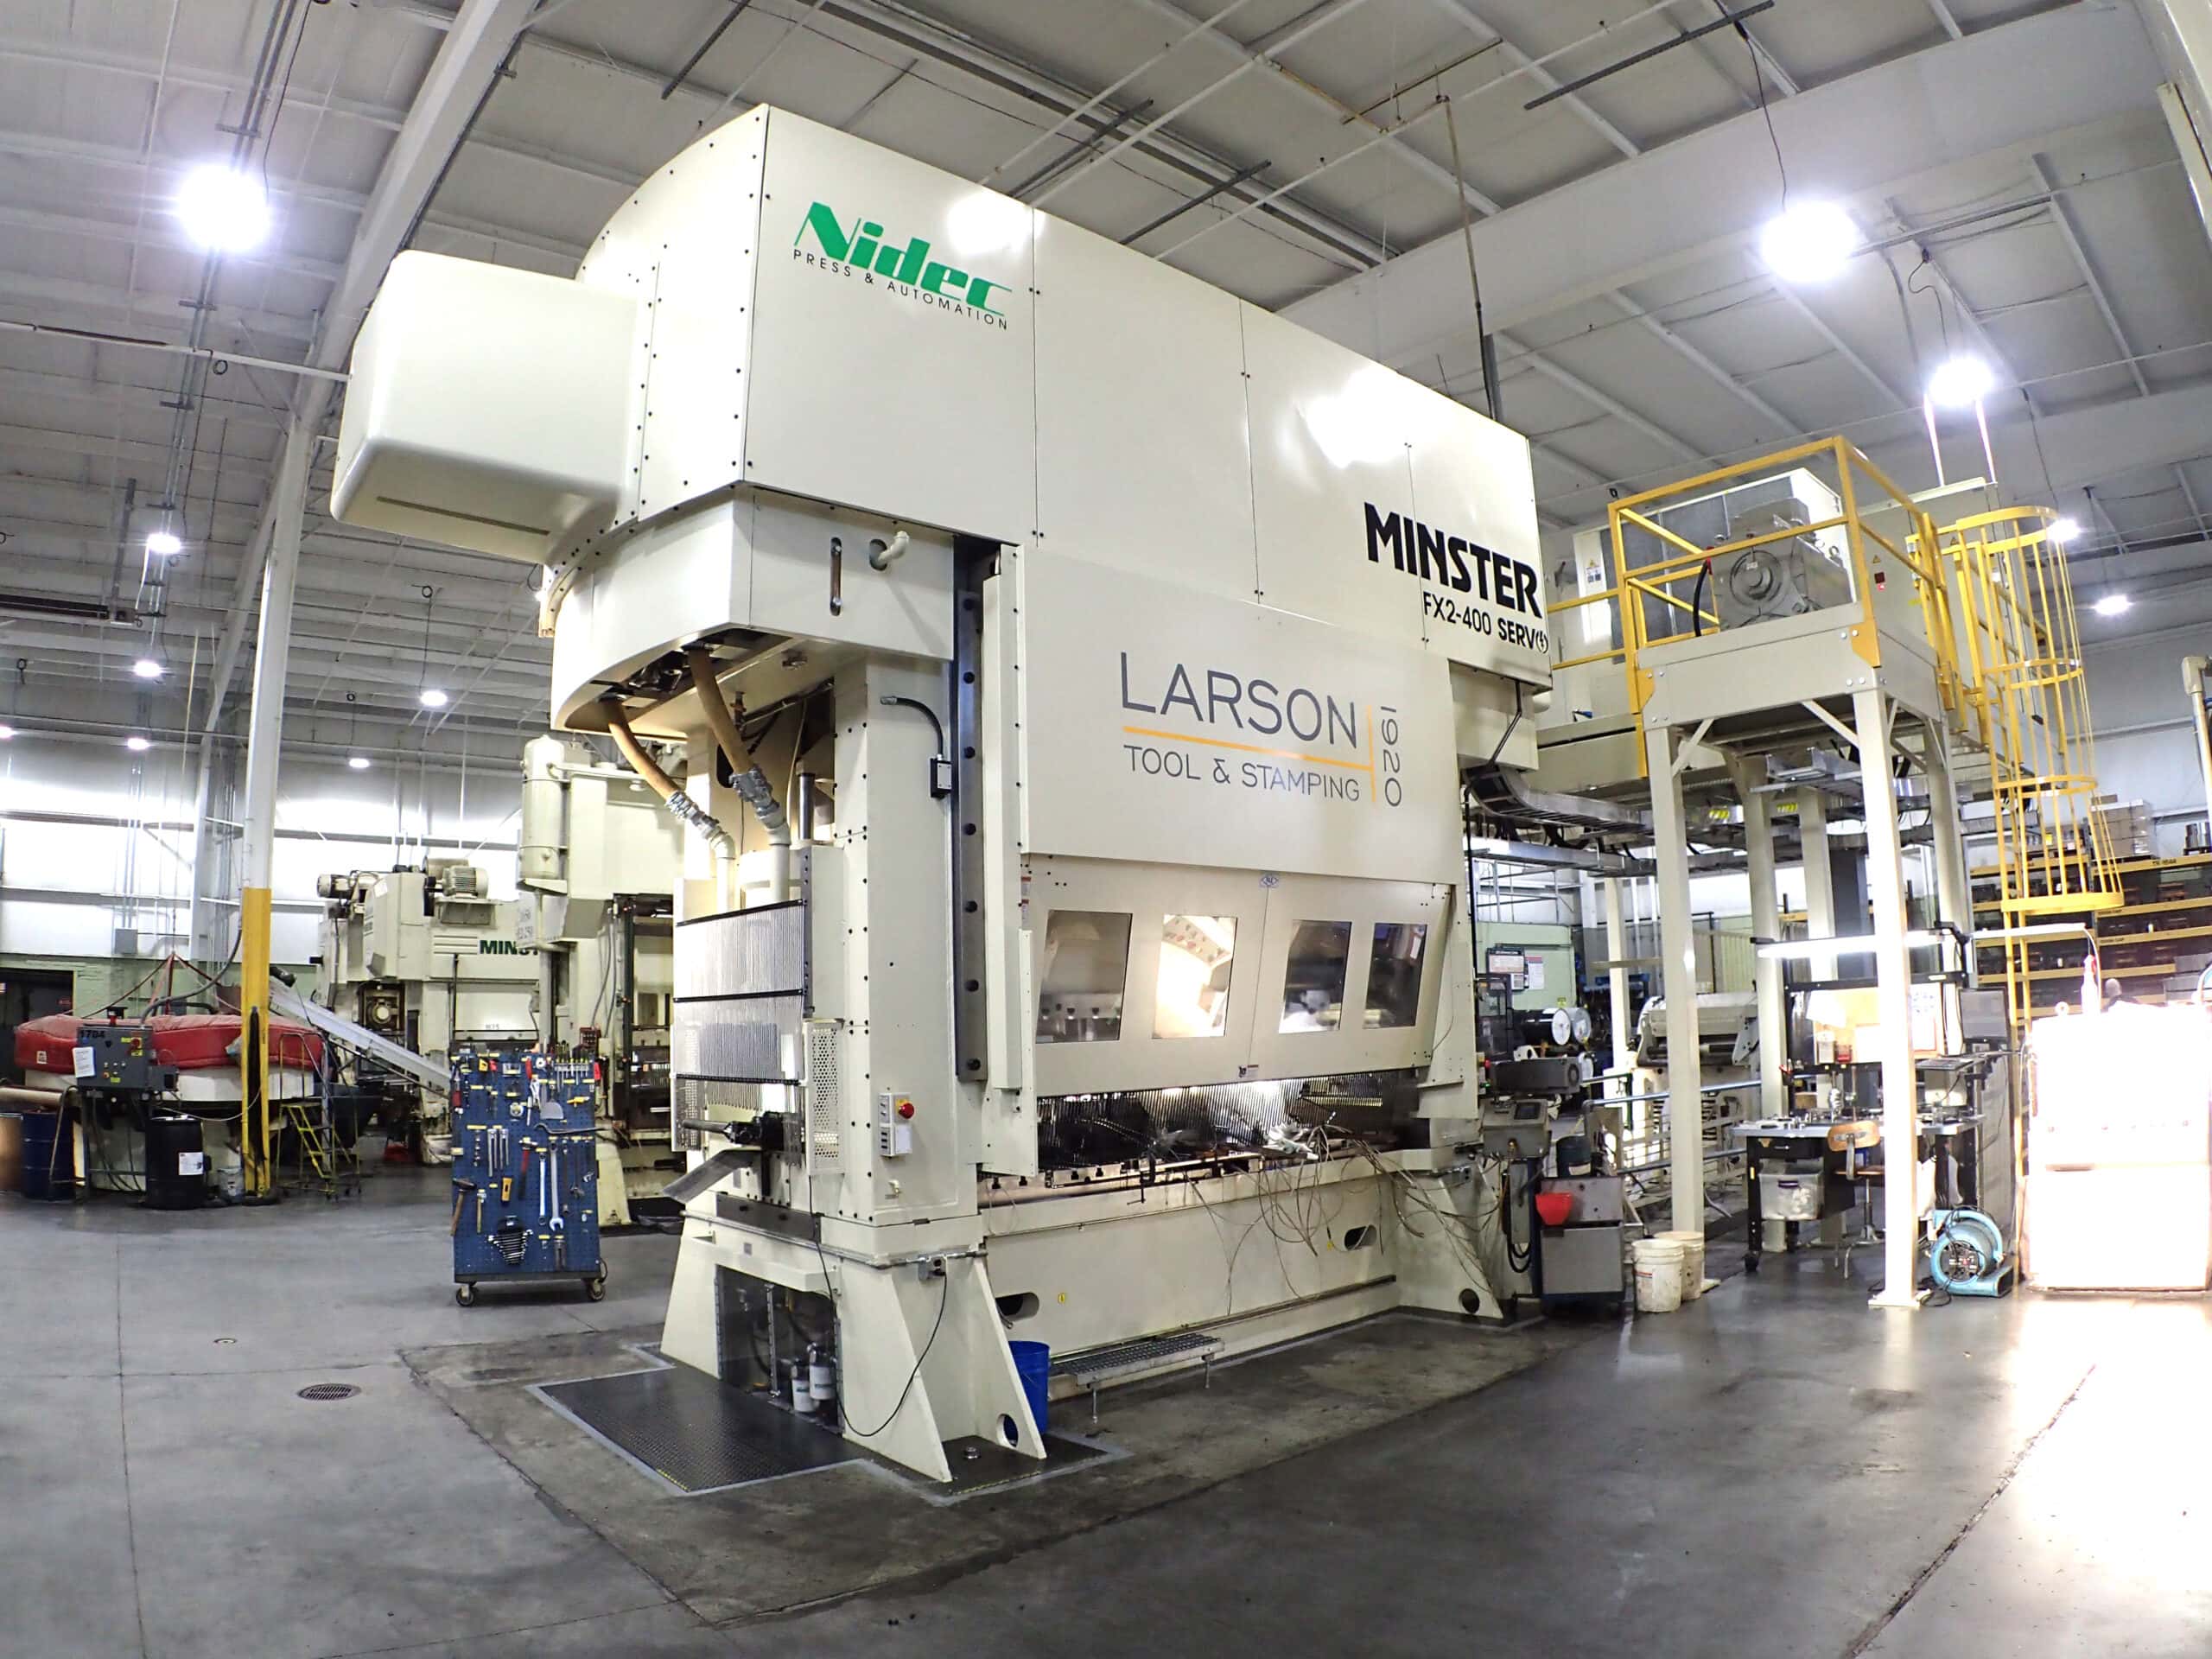 Larson tool adds new high-performance servo press to its metal stamping facility